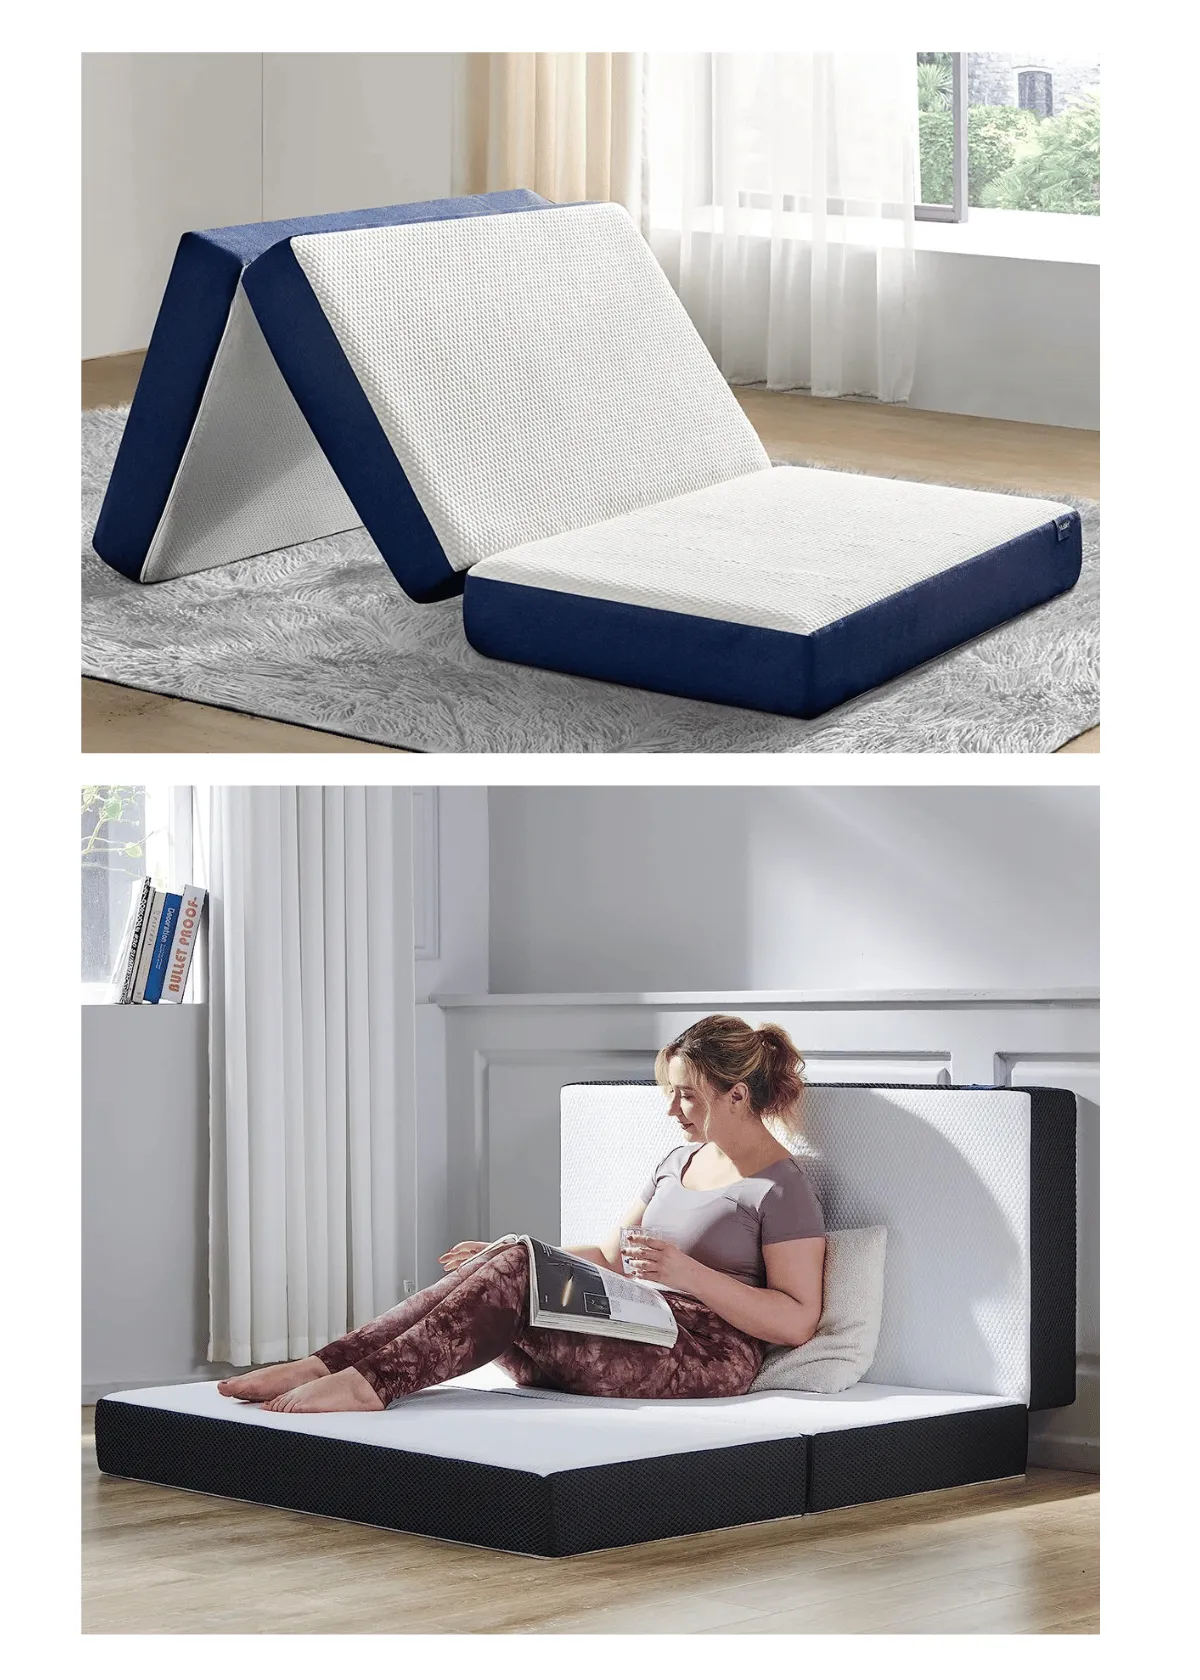 "Foldable Mattress | Best Solutions For Small Spaces and Travel"